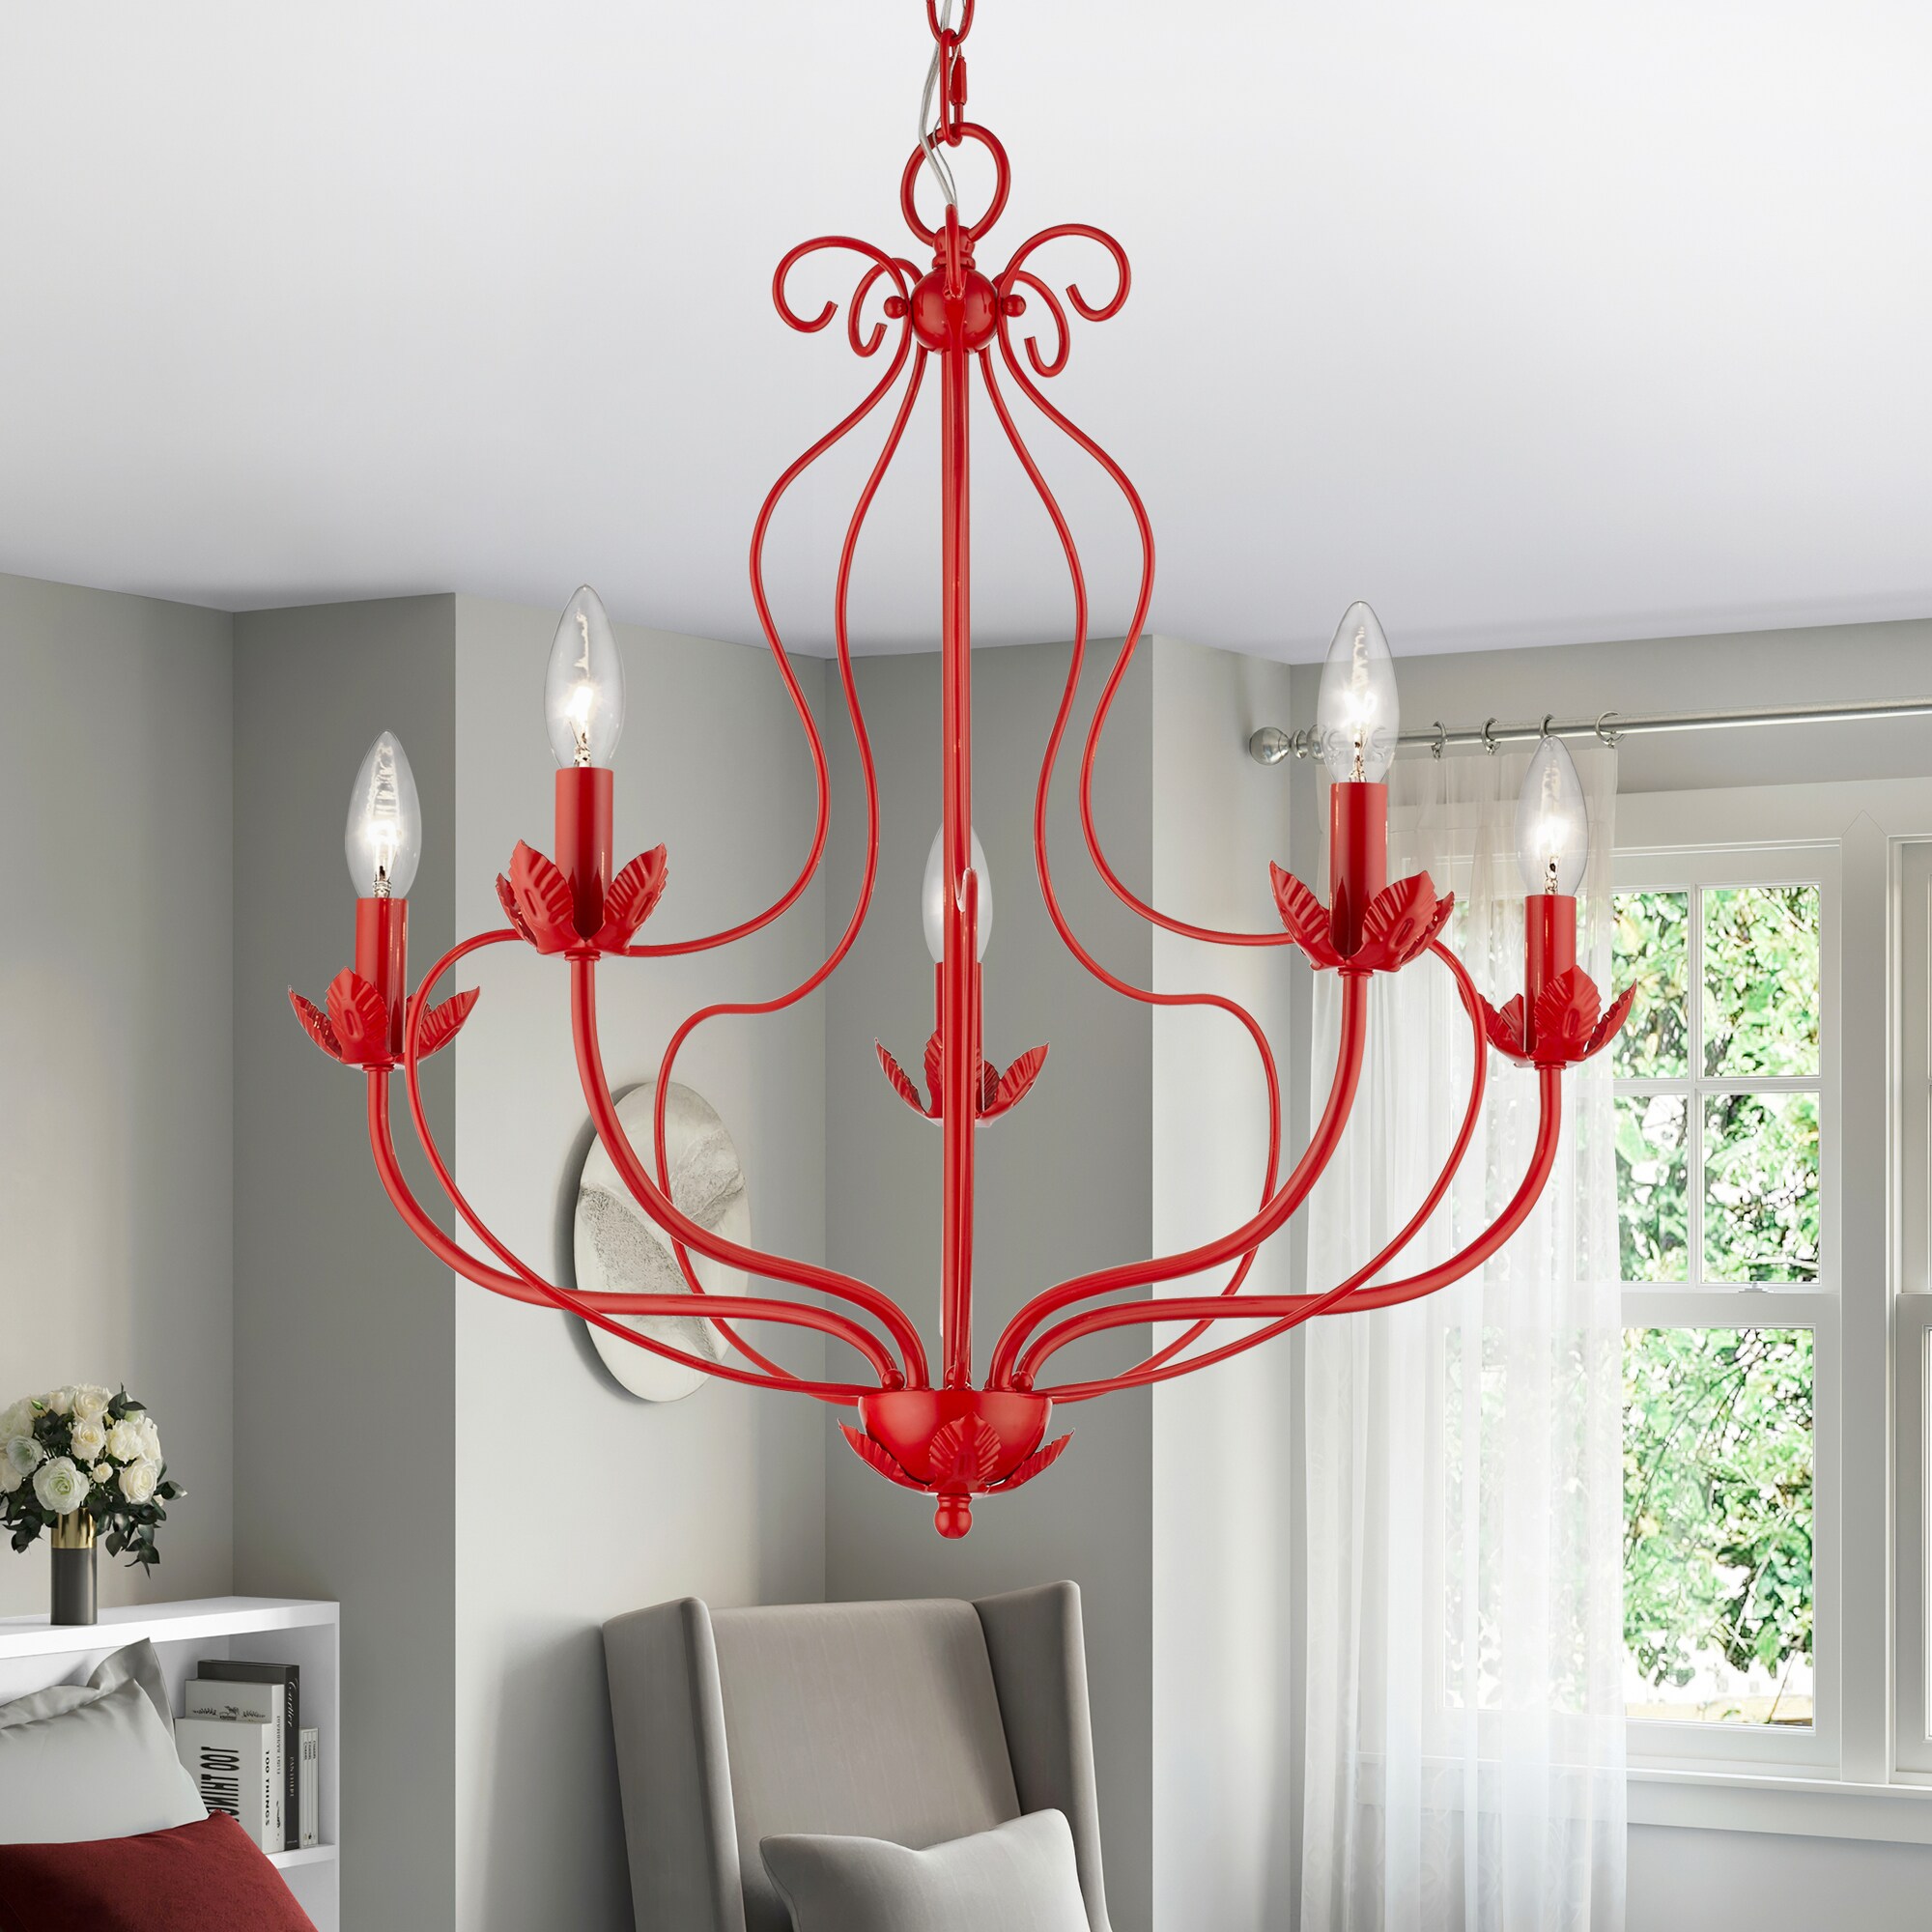 Chandeliers at